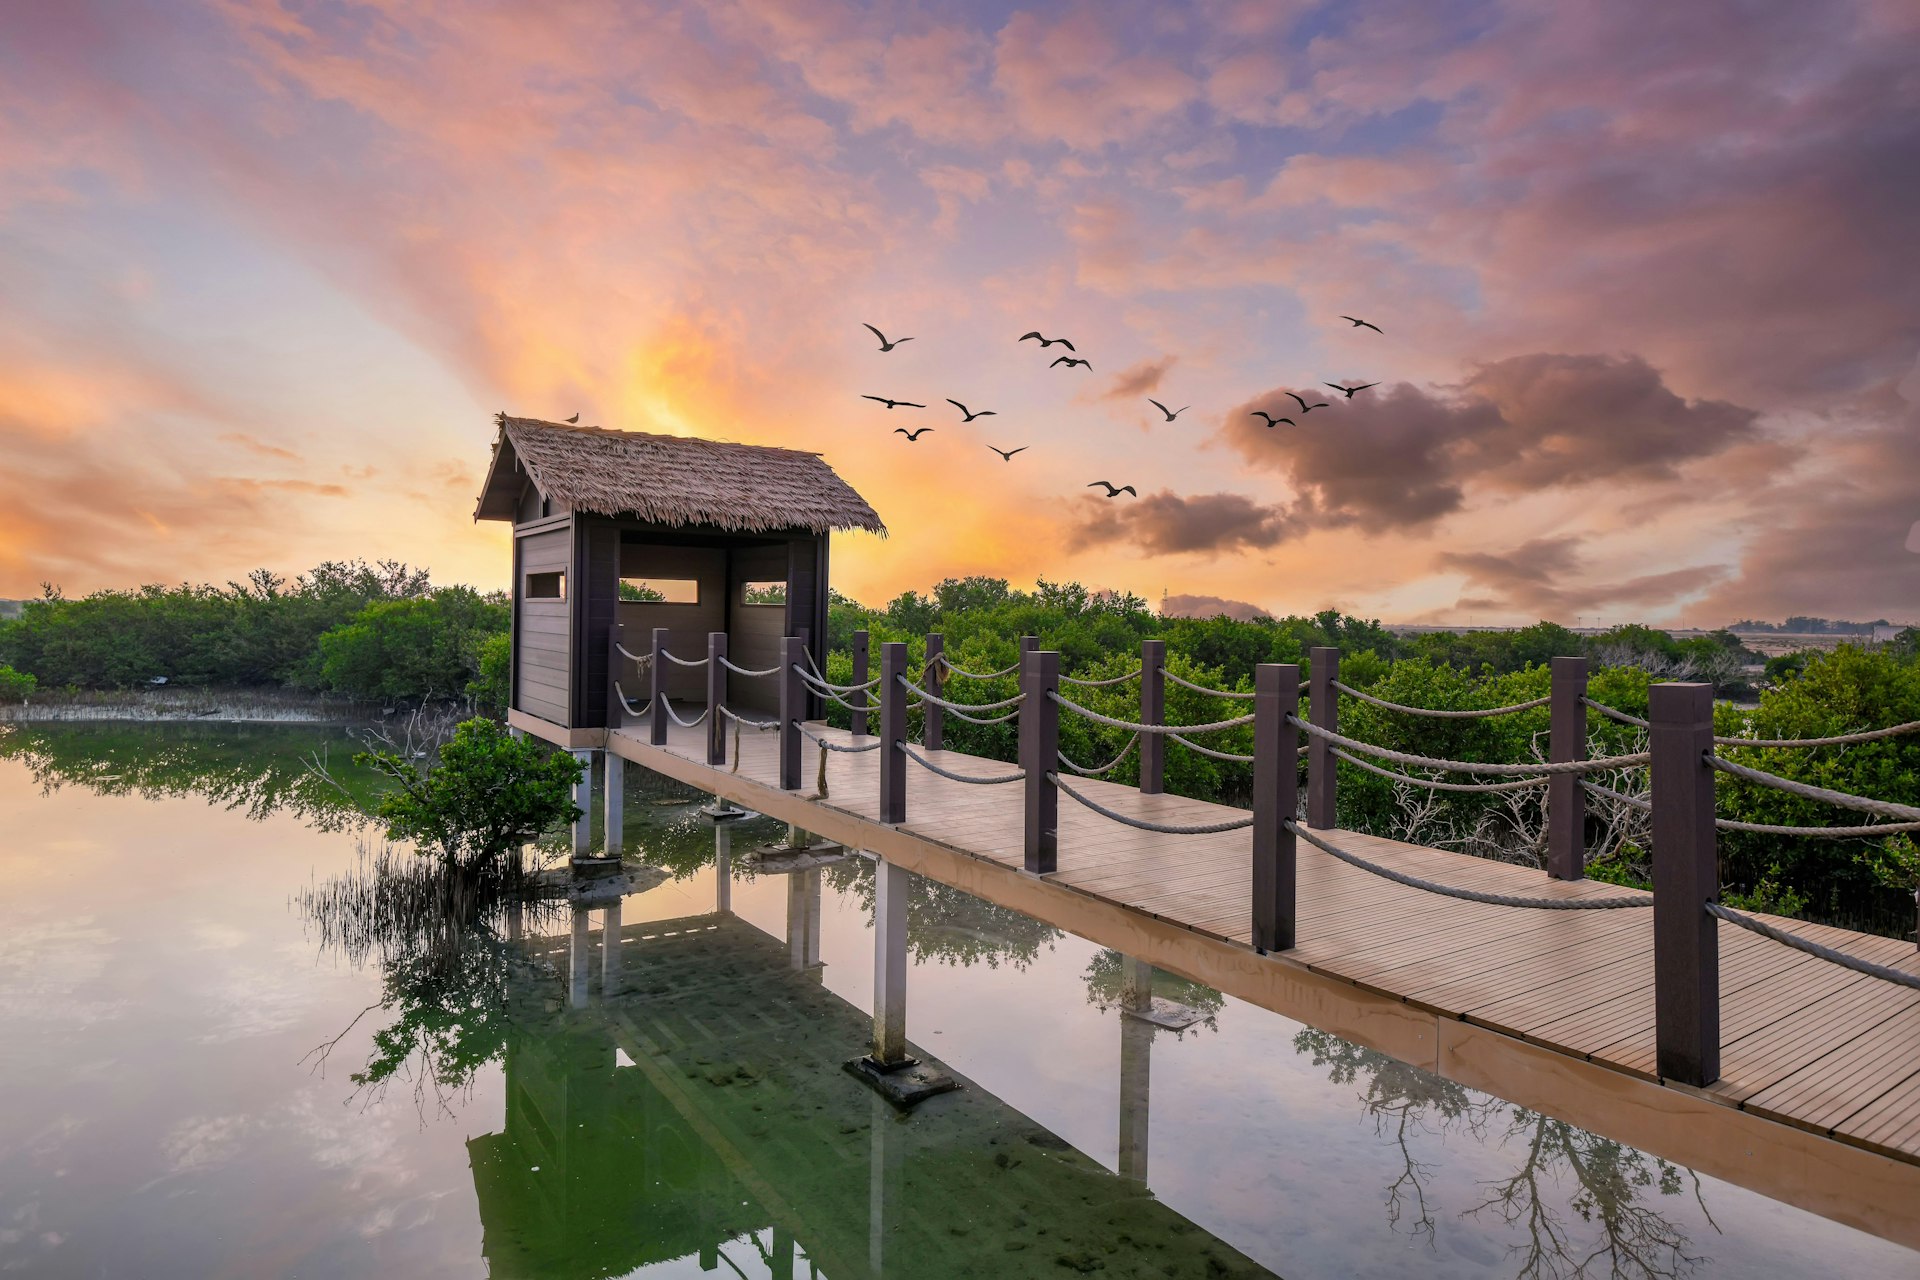 The sun sets and white birds fly over a long boardwalk that ends in a small viewing hut with horizontal punch-out windows peeking out over the mangrove wamp of Al Thakhira National Reserve in Qatar